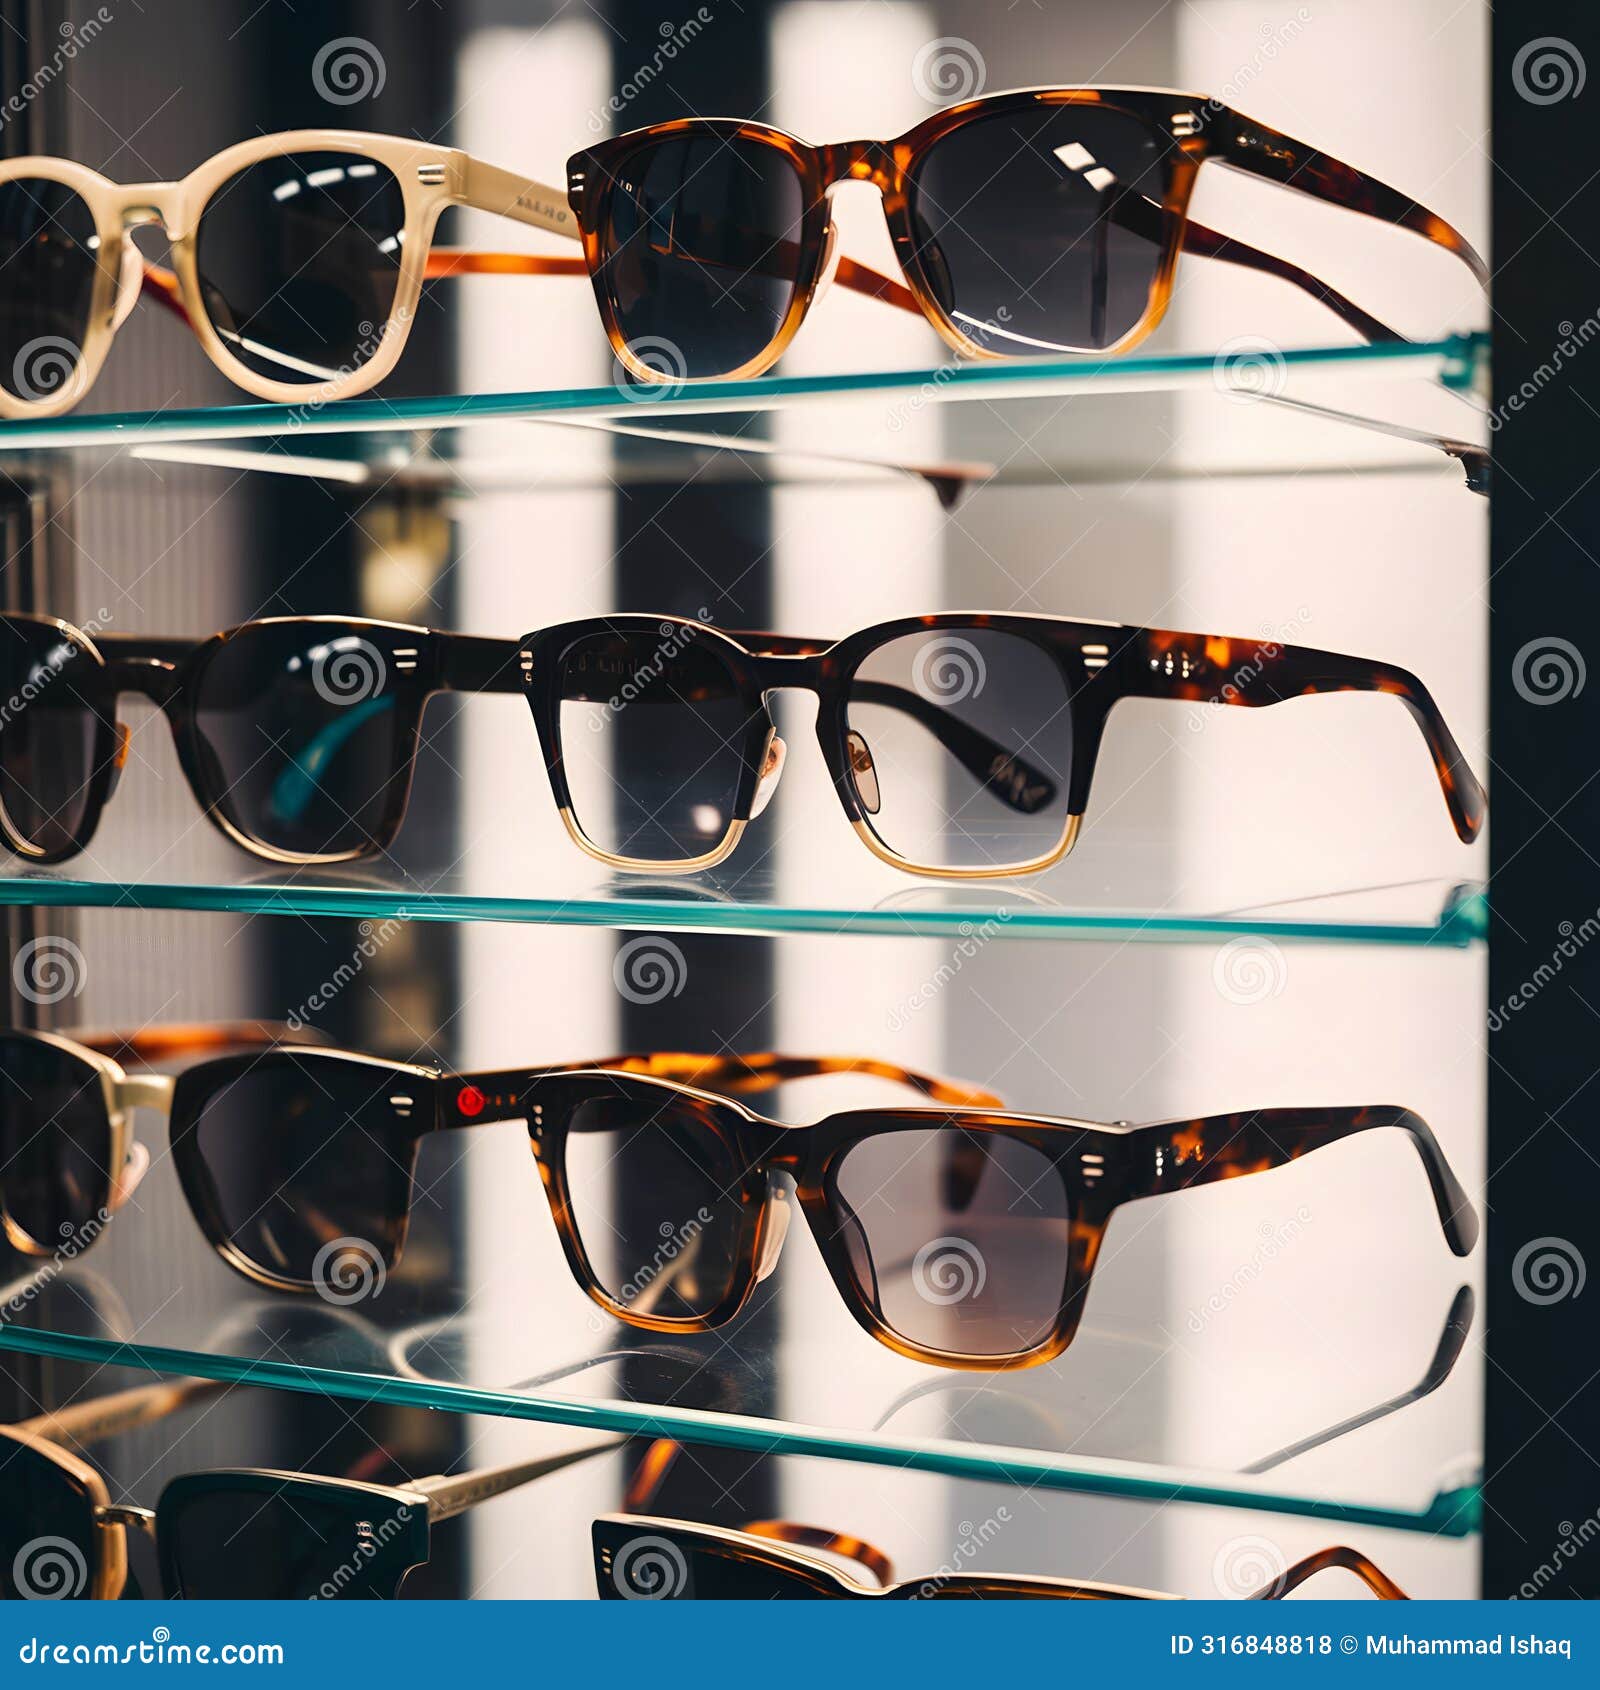 new sunglasses displayed in modern ophthalmic store showcase